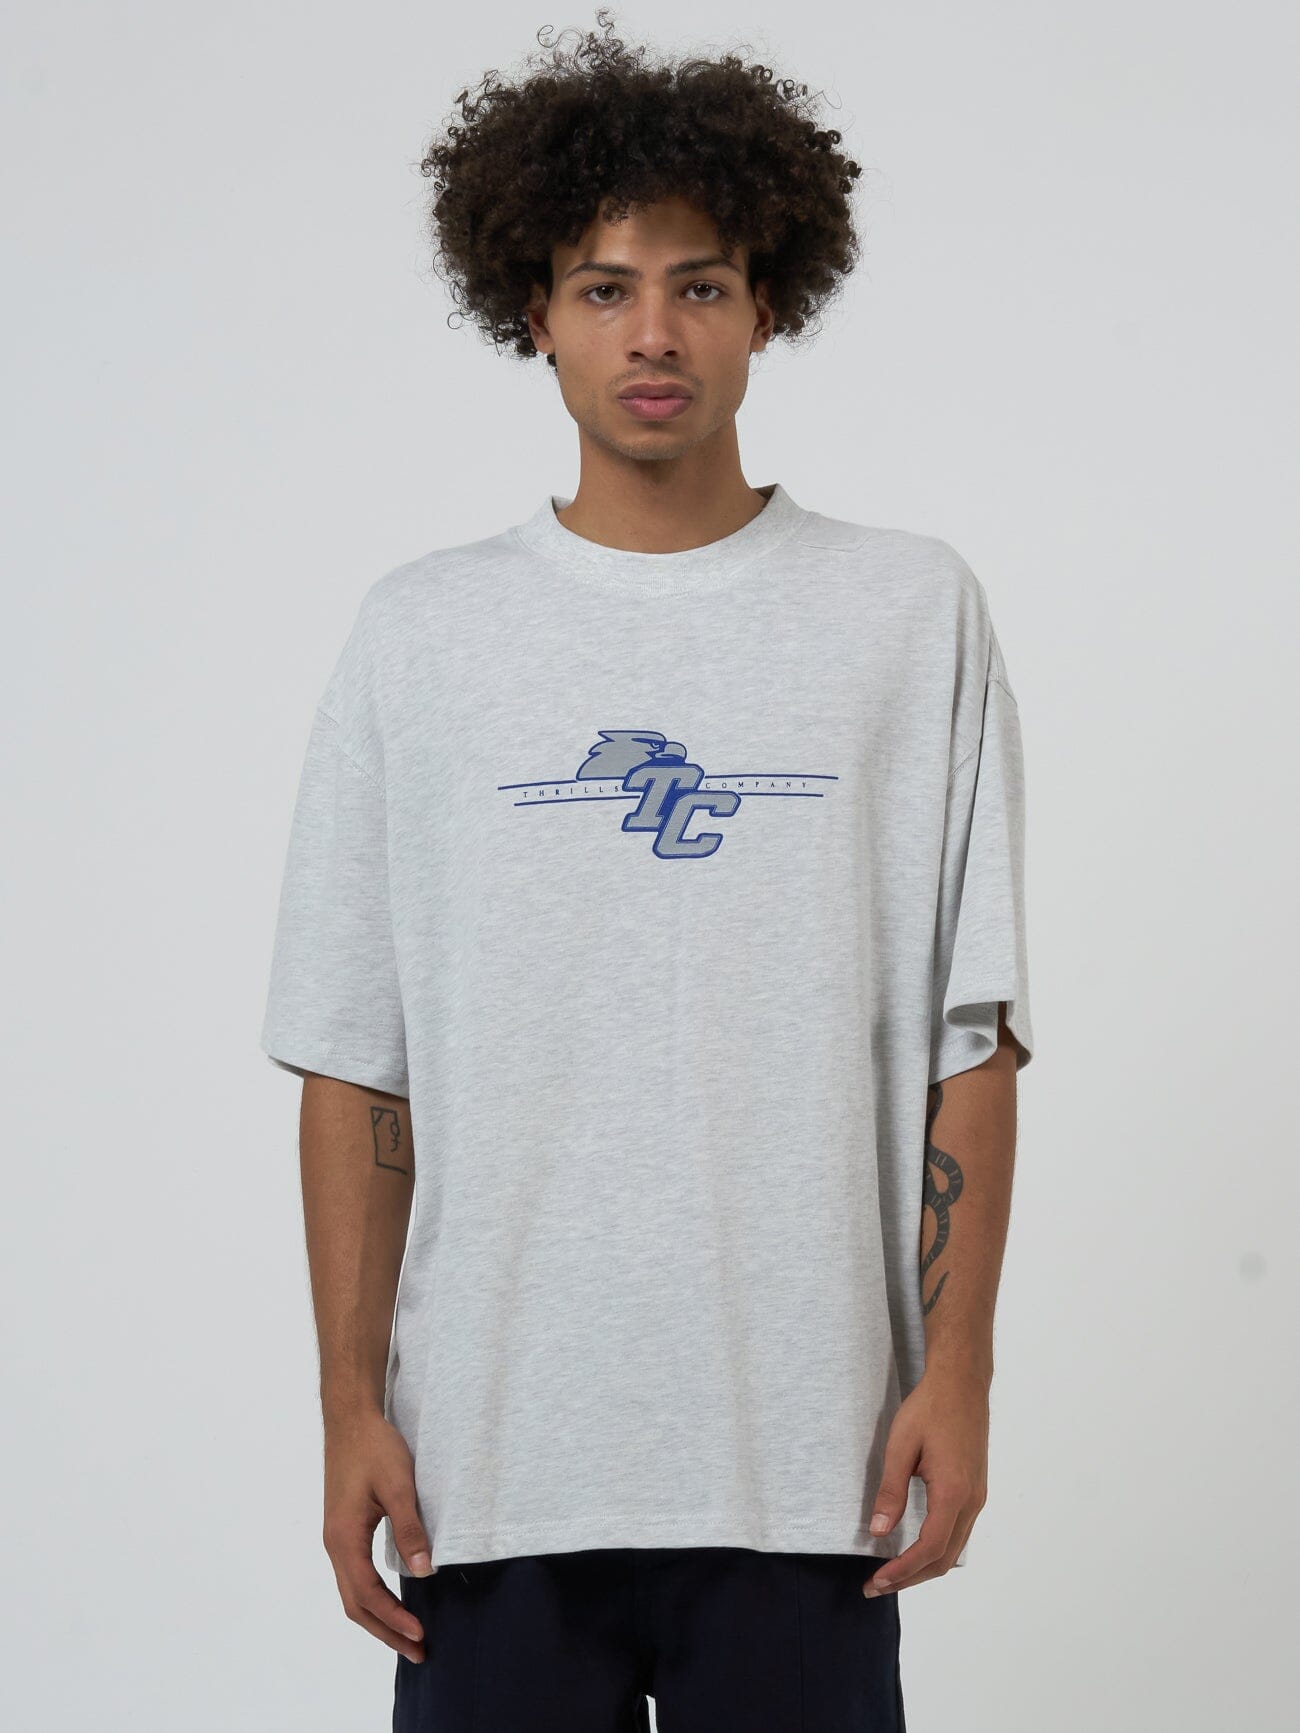 Redshirt Box Fit Oversize Tee - White Marle